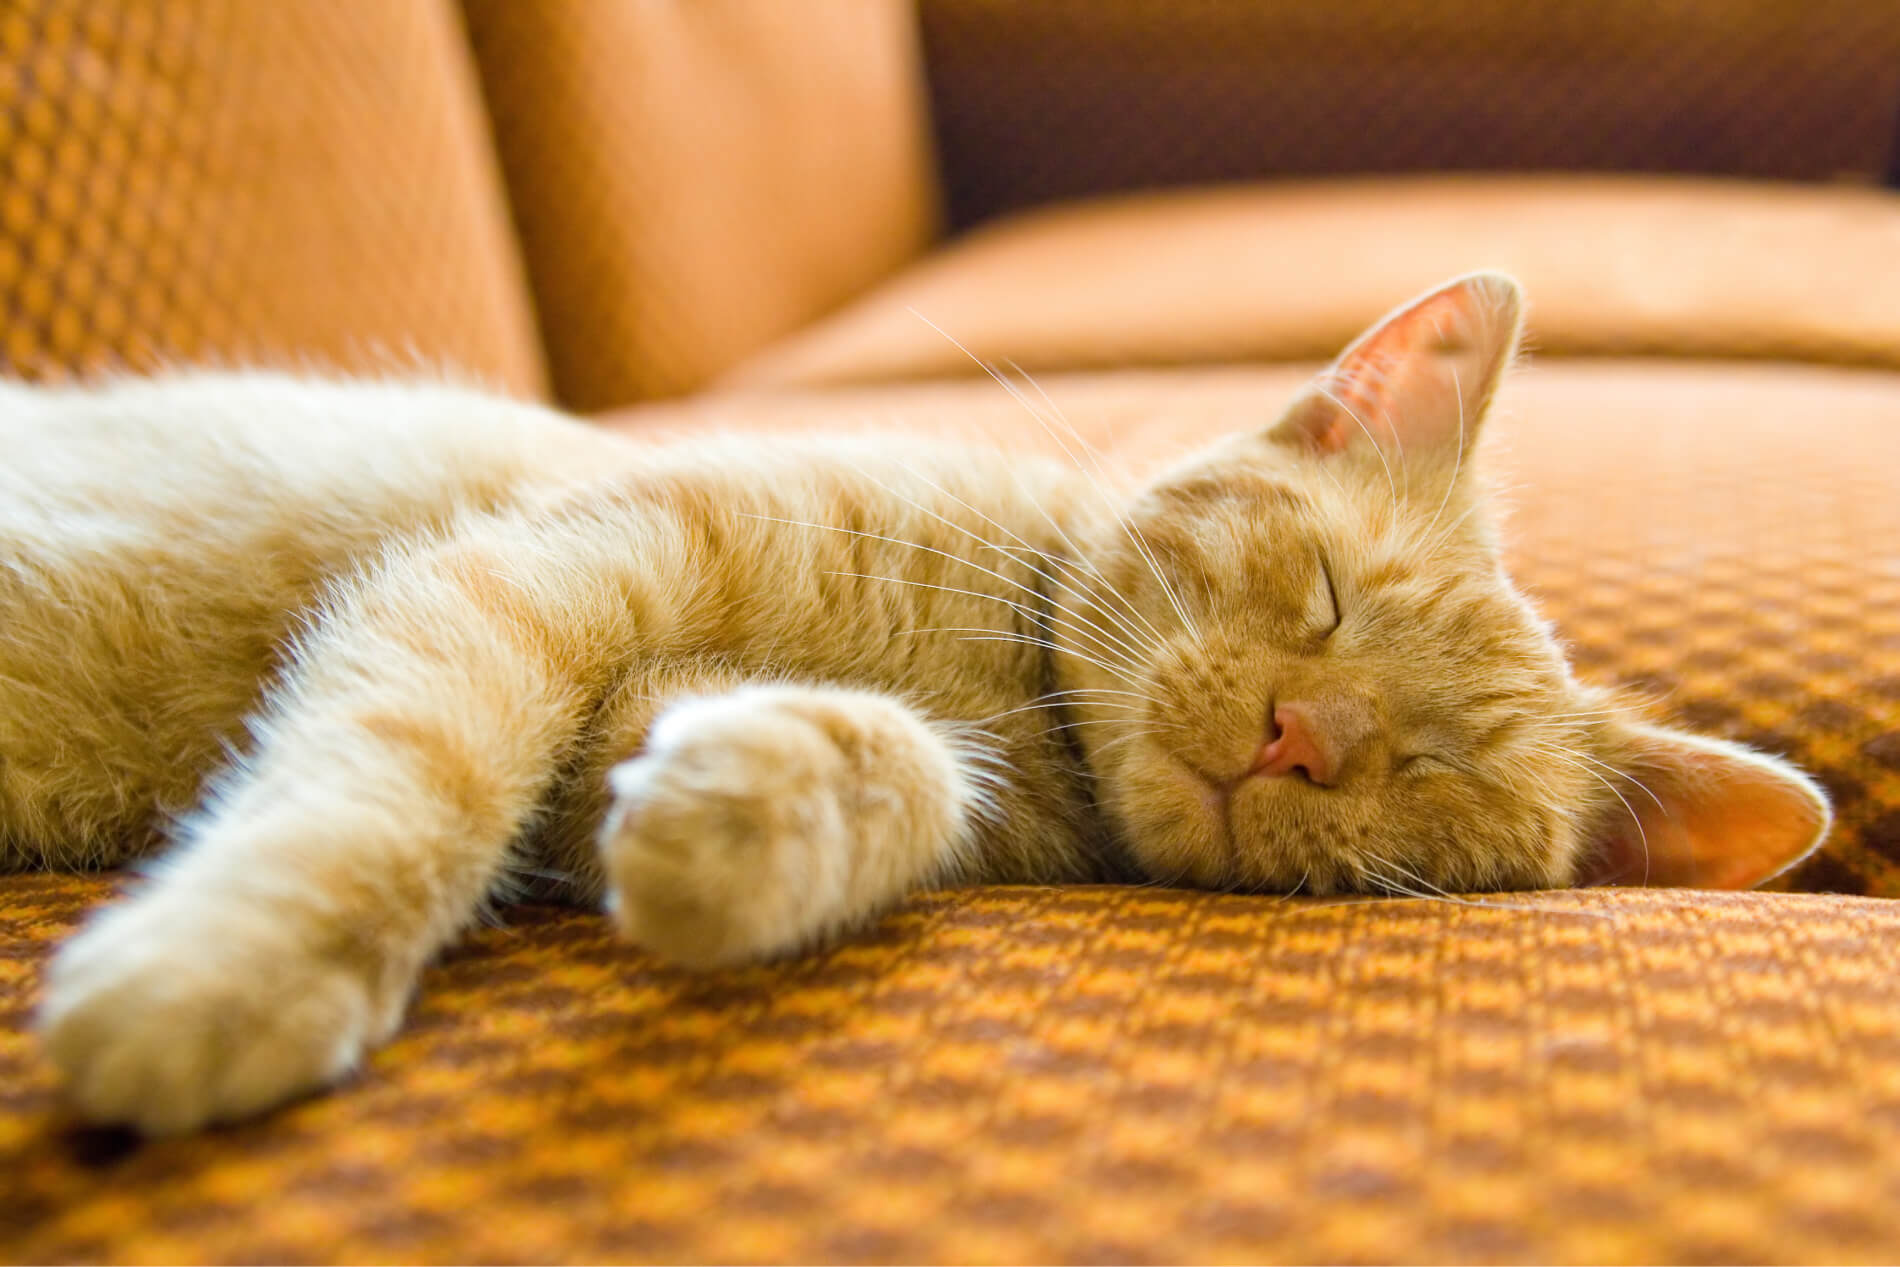 Cat sleeps a lot: What is the reason?